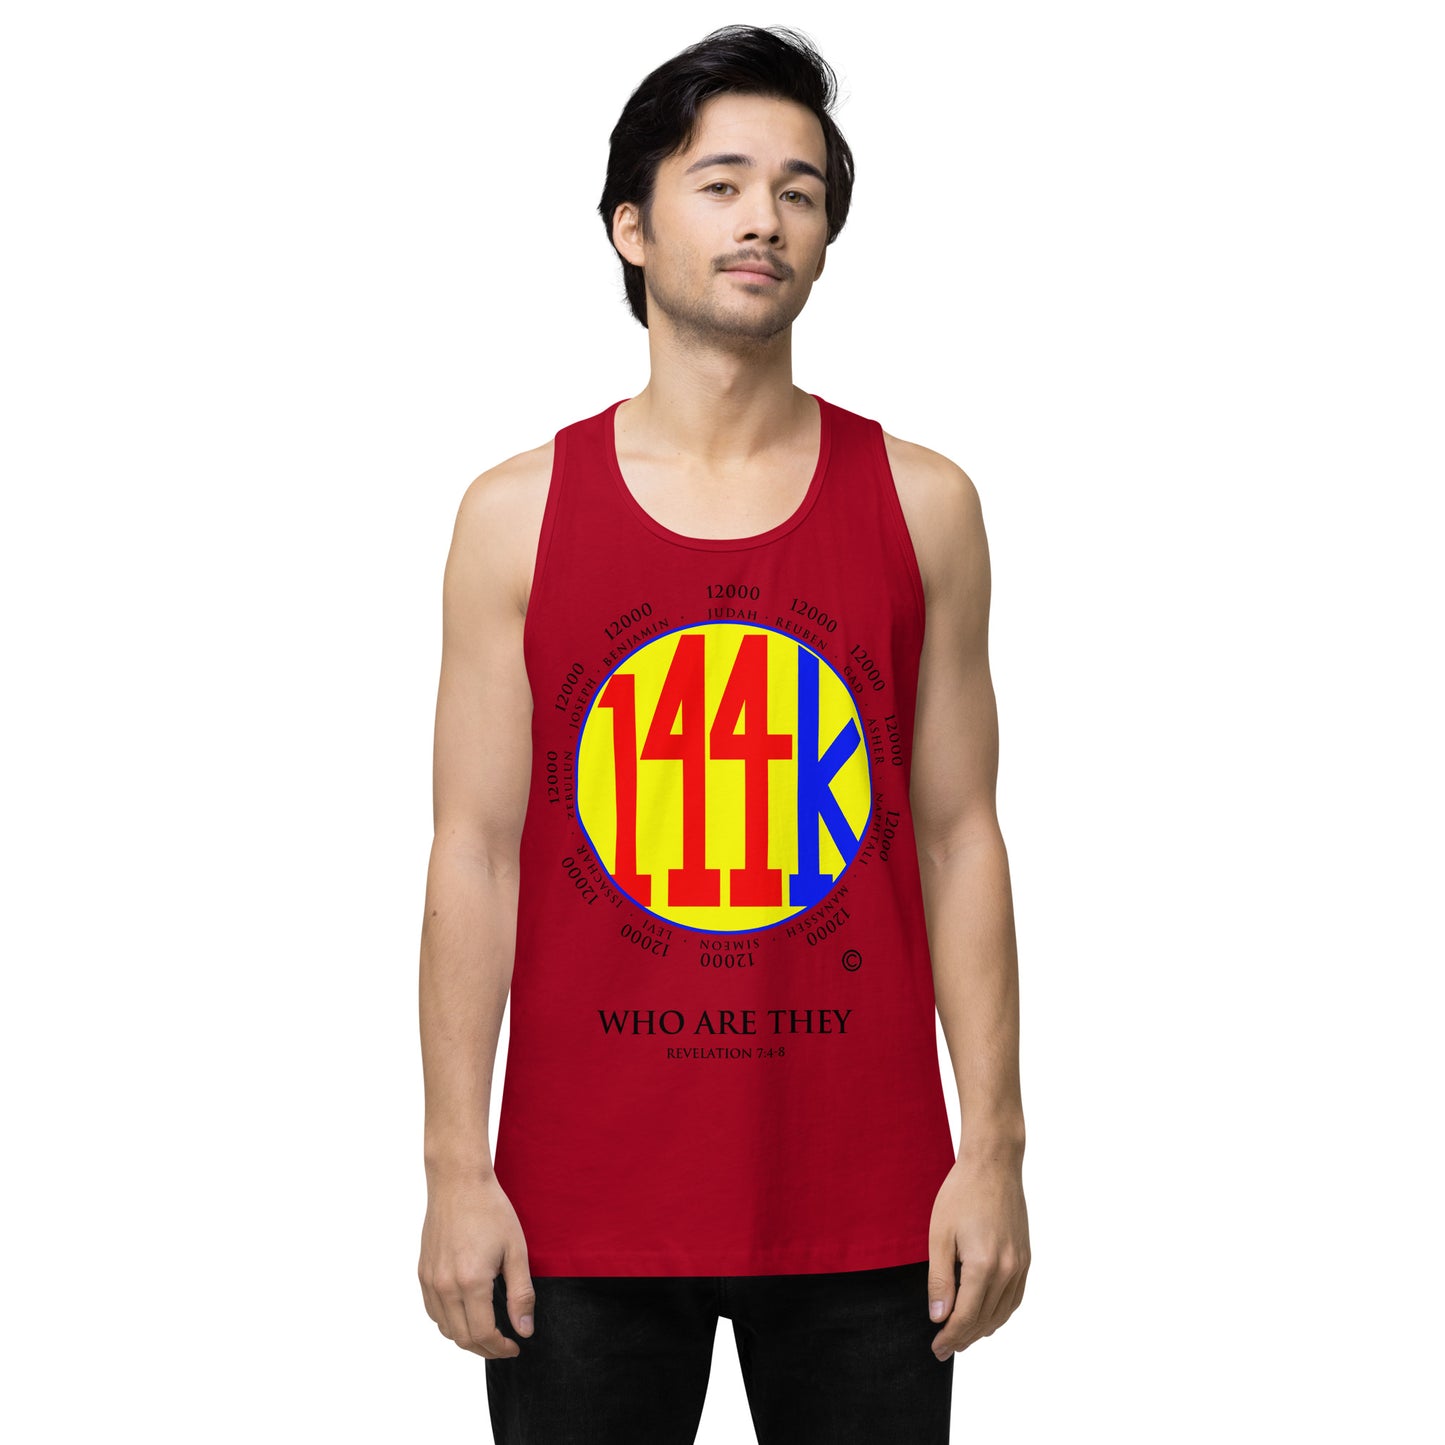 Who Are They Men’s Premium Tank Top